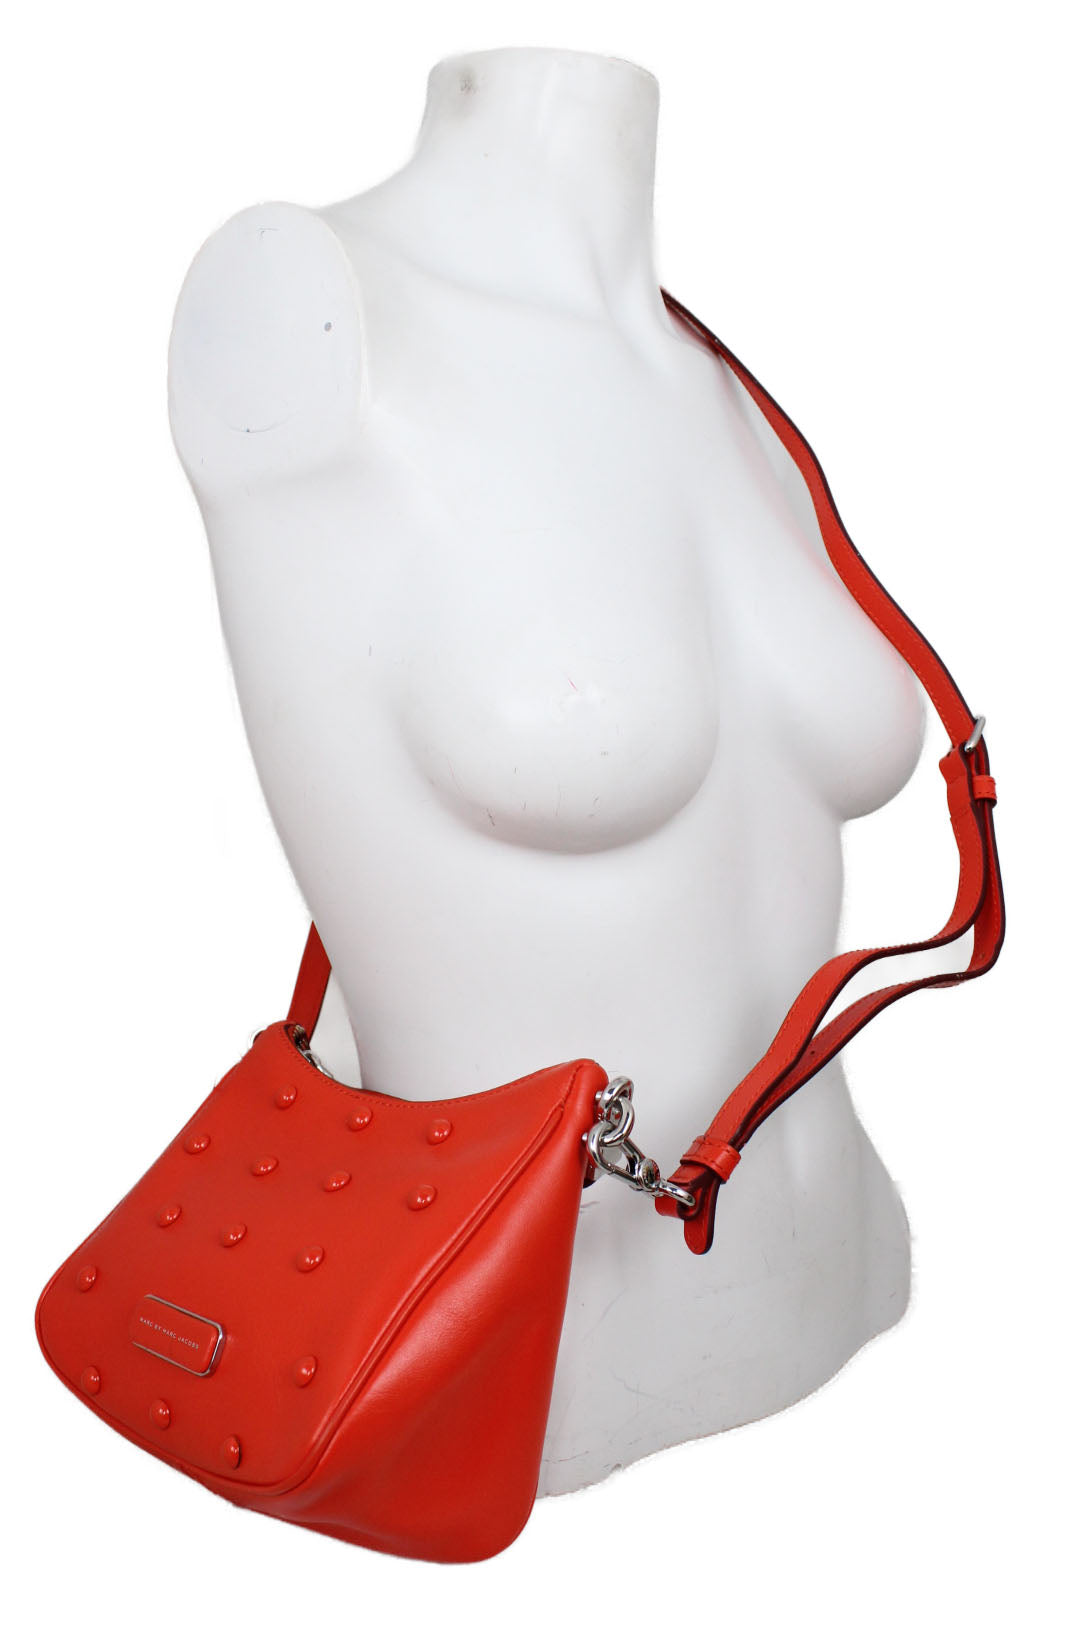 side view of marc by marc jacobs sample orange cross body bag. features orange studs and triangular side panel, handbag strap and longer strap. 